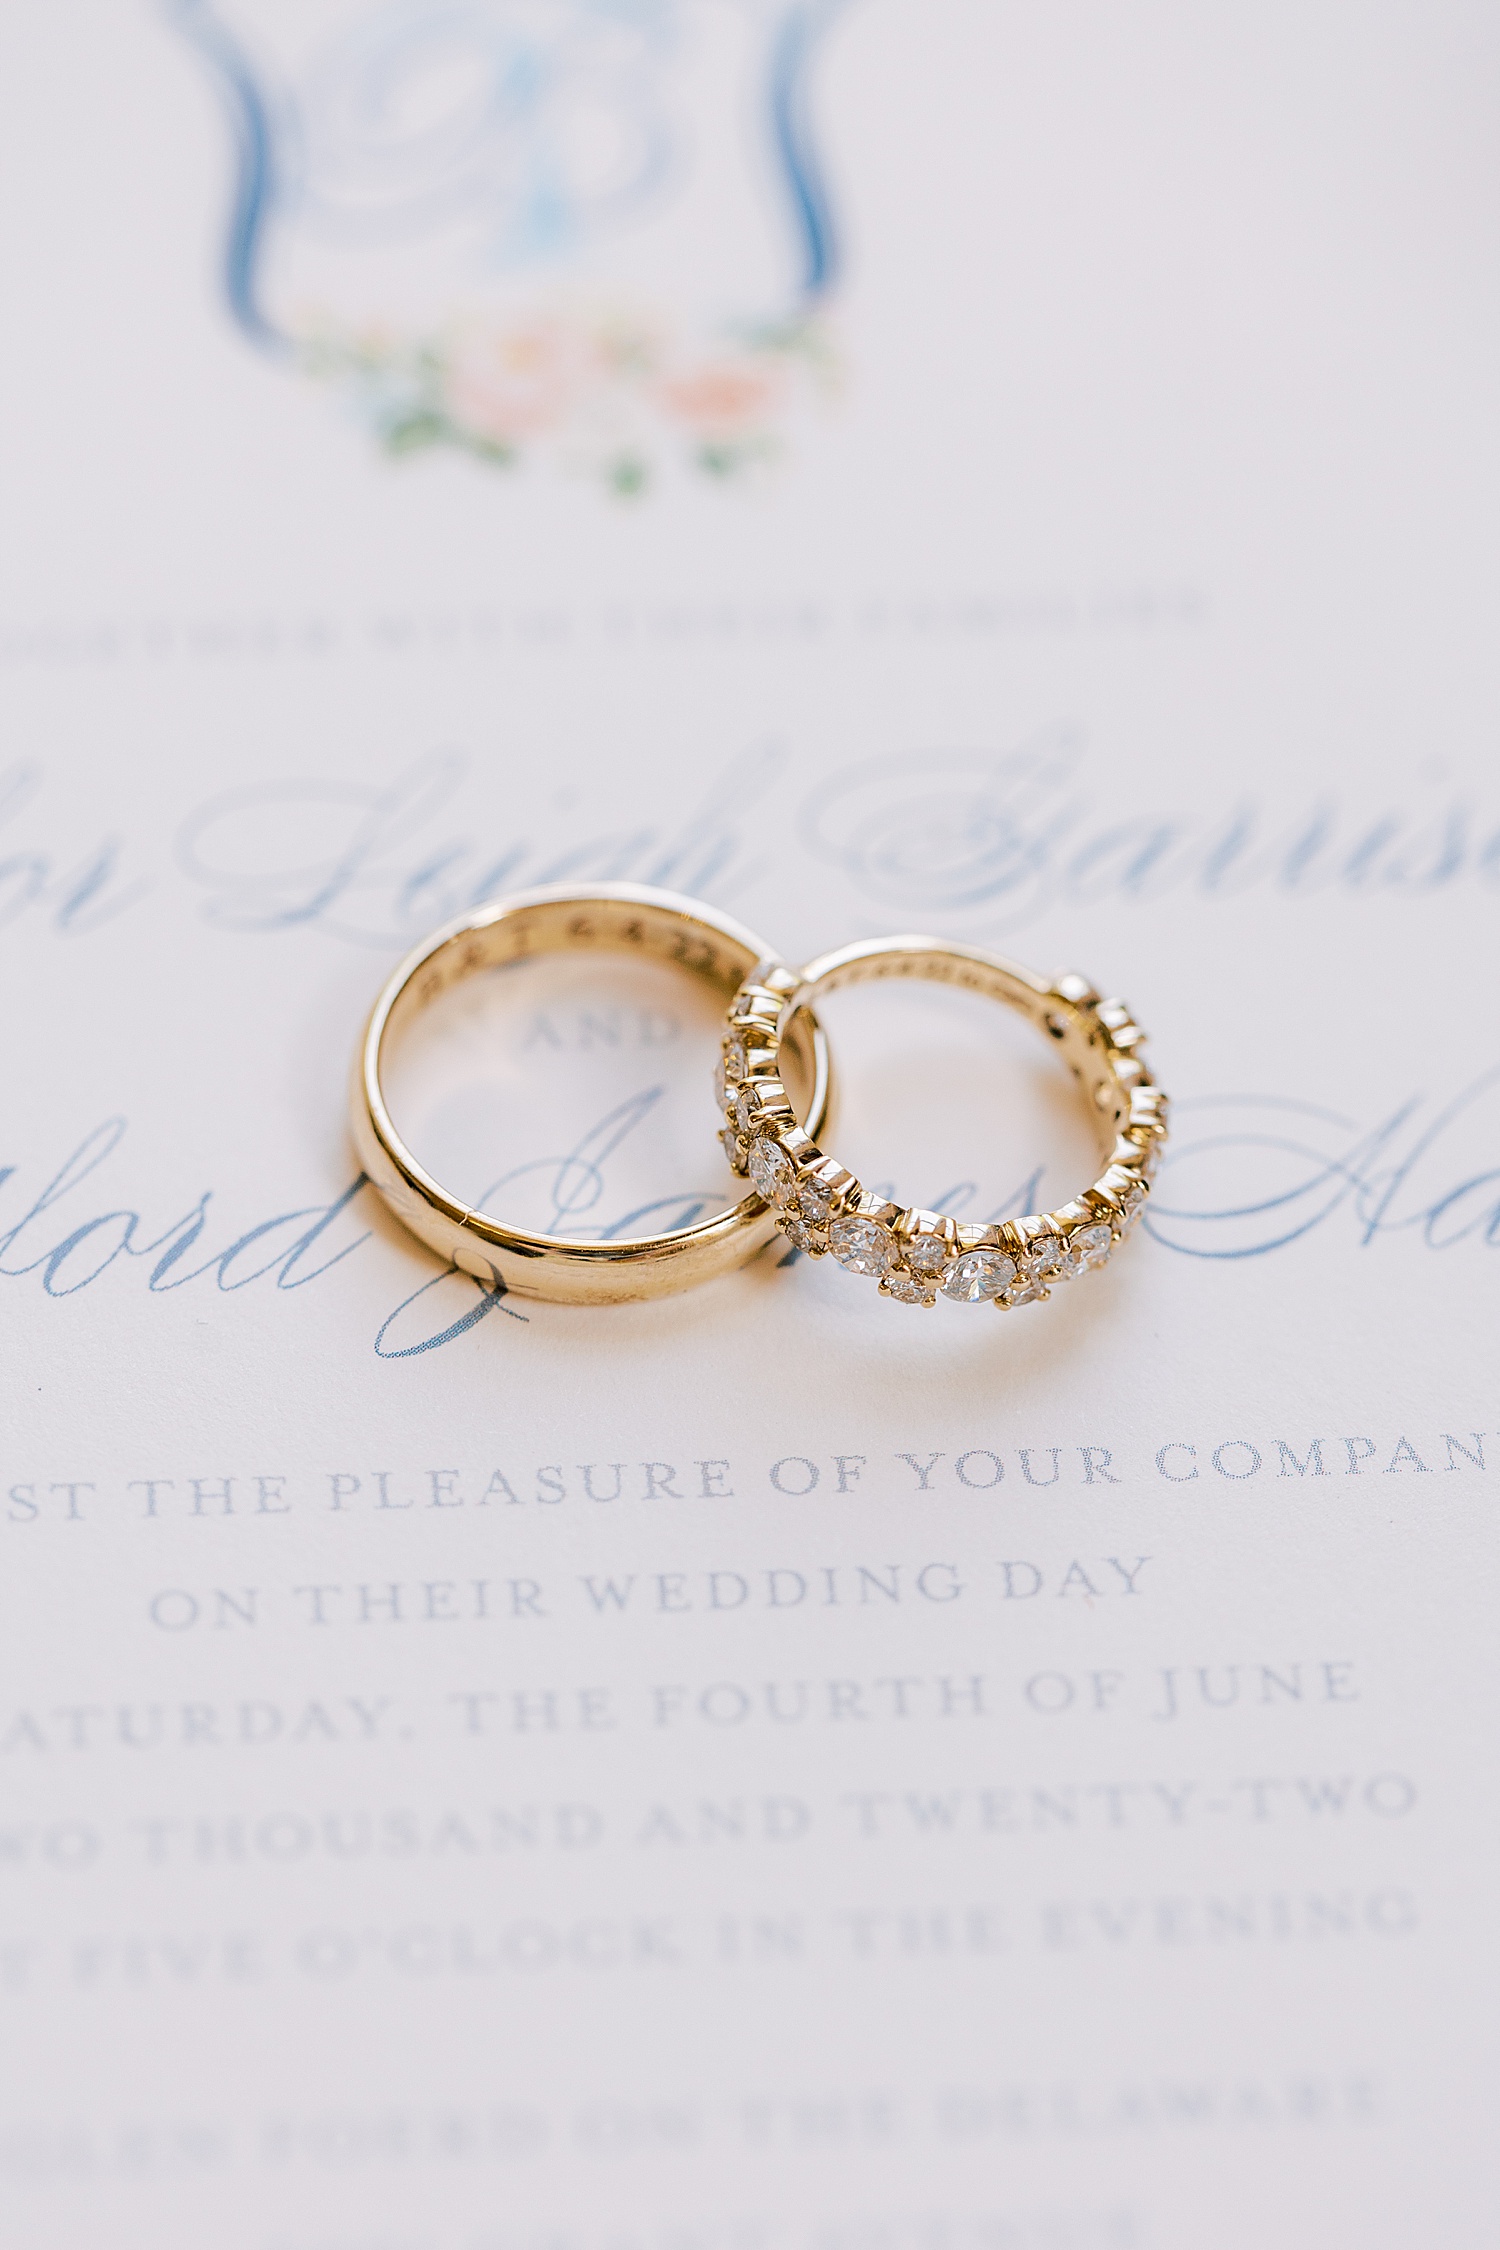 gold wedding bands rest on invitation suite with blue script 